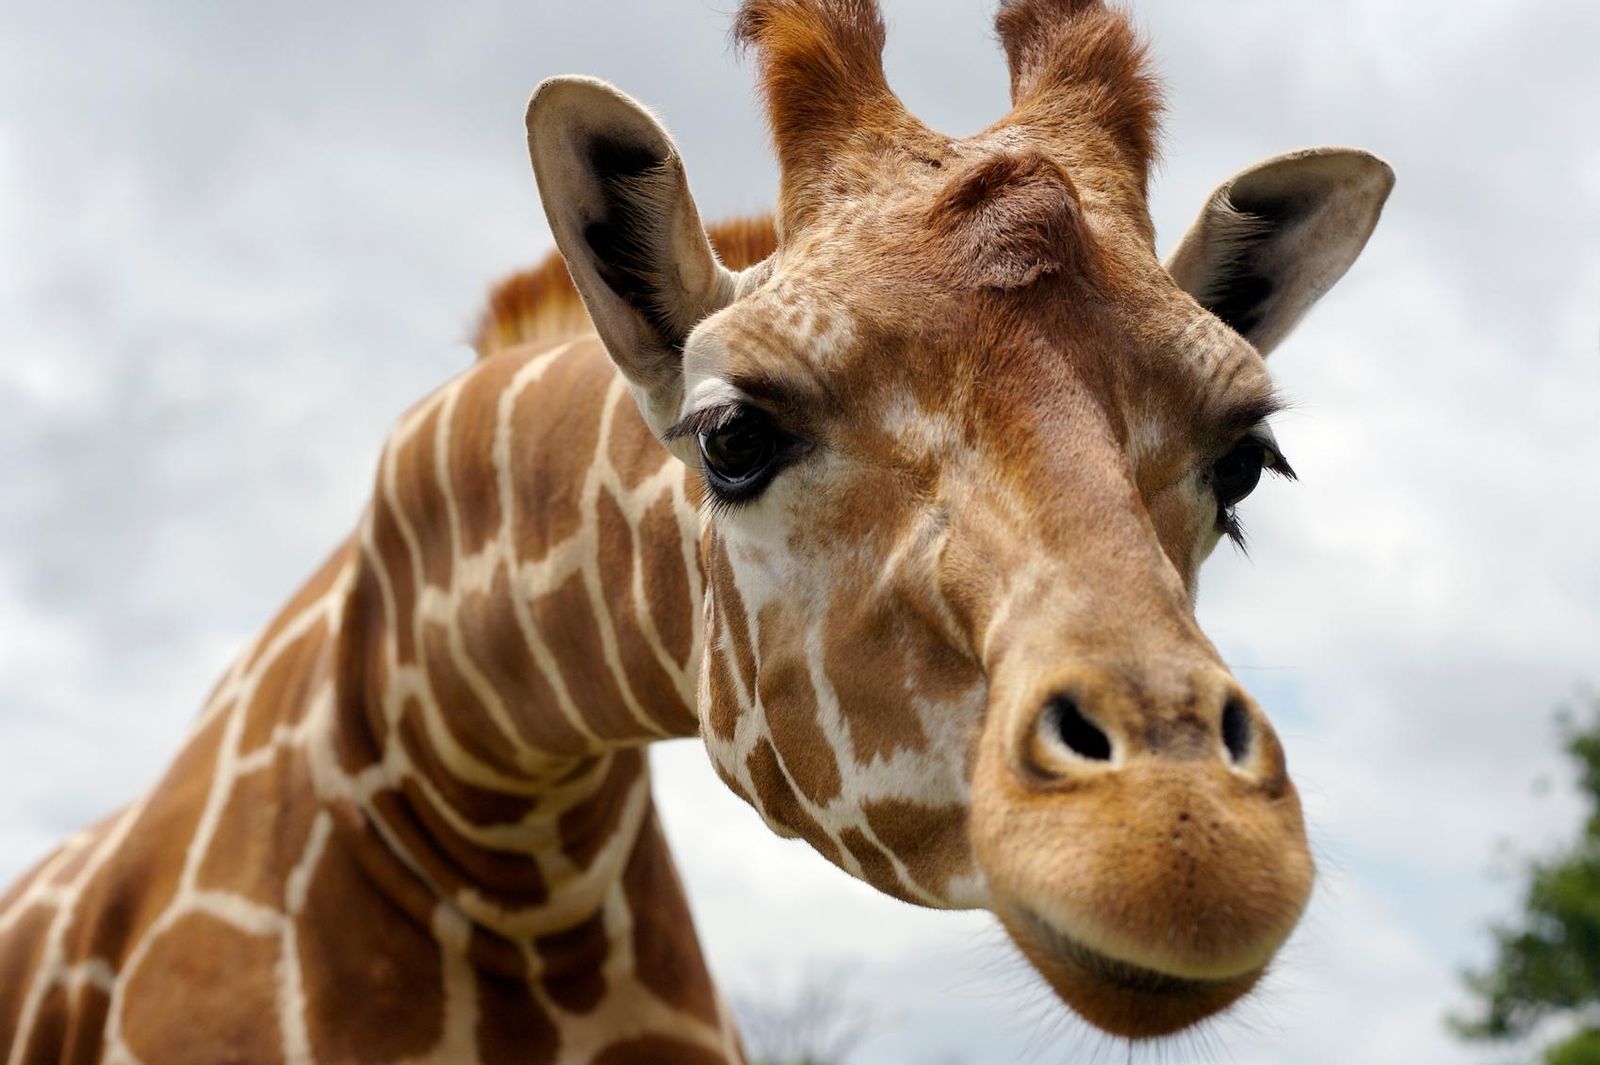 There Are Four Giraffe Species—Not Just One | Smart News ...